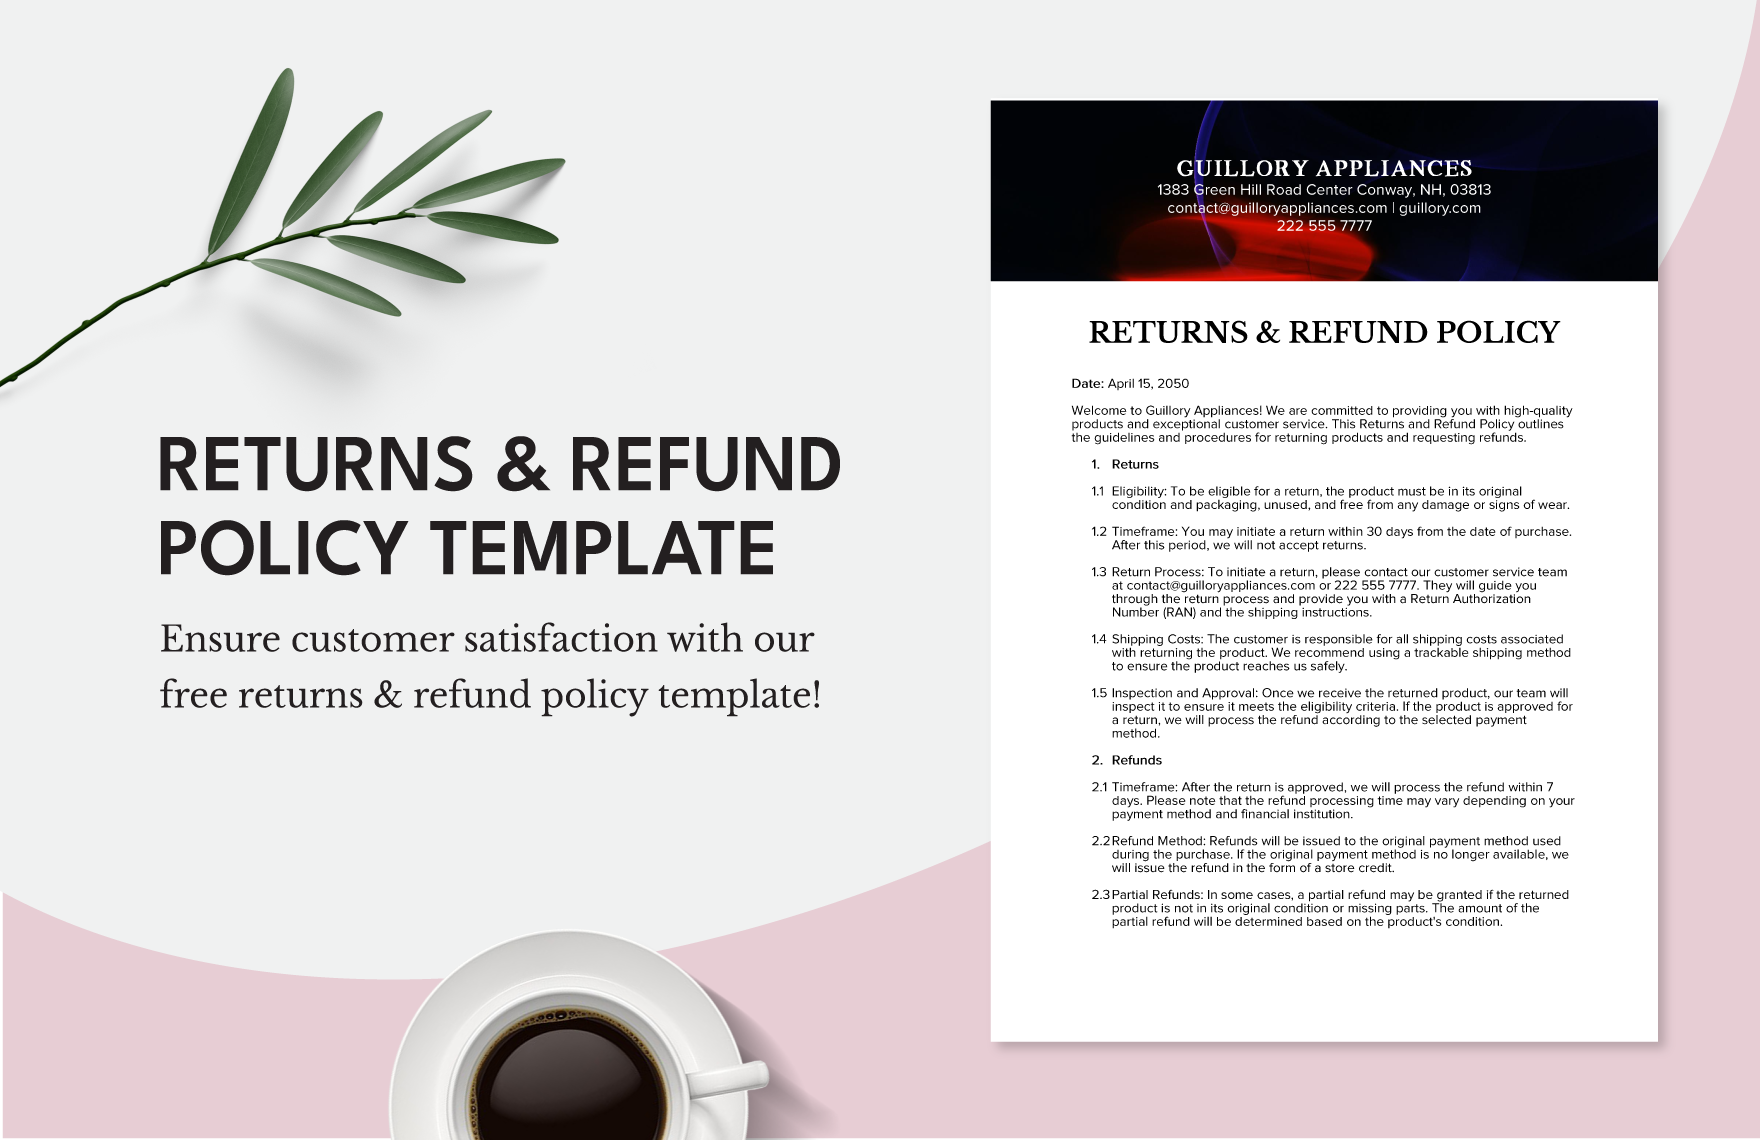 Returns & Refund Policy Template